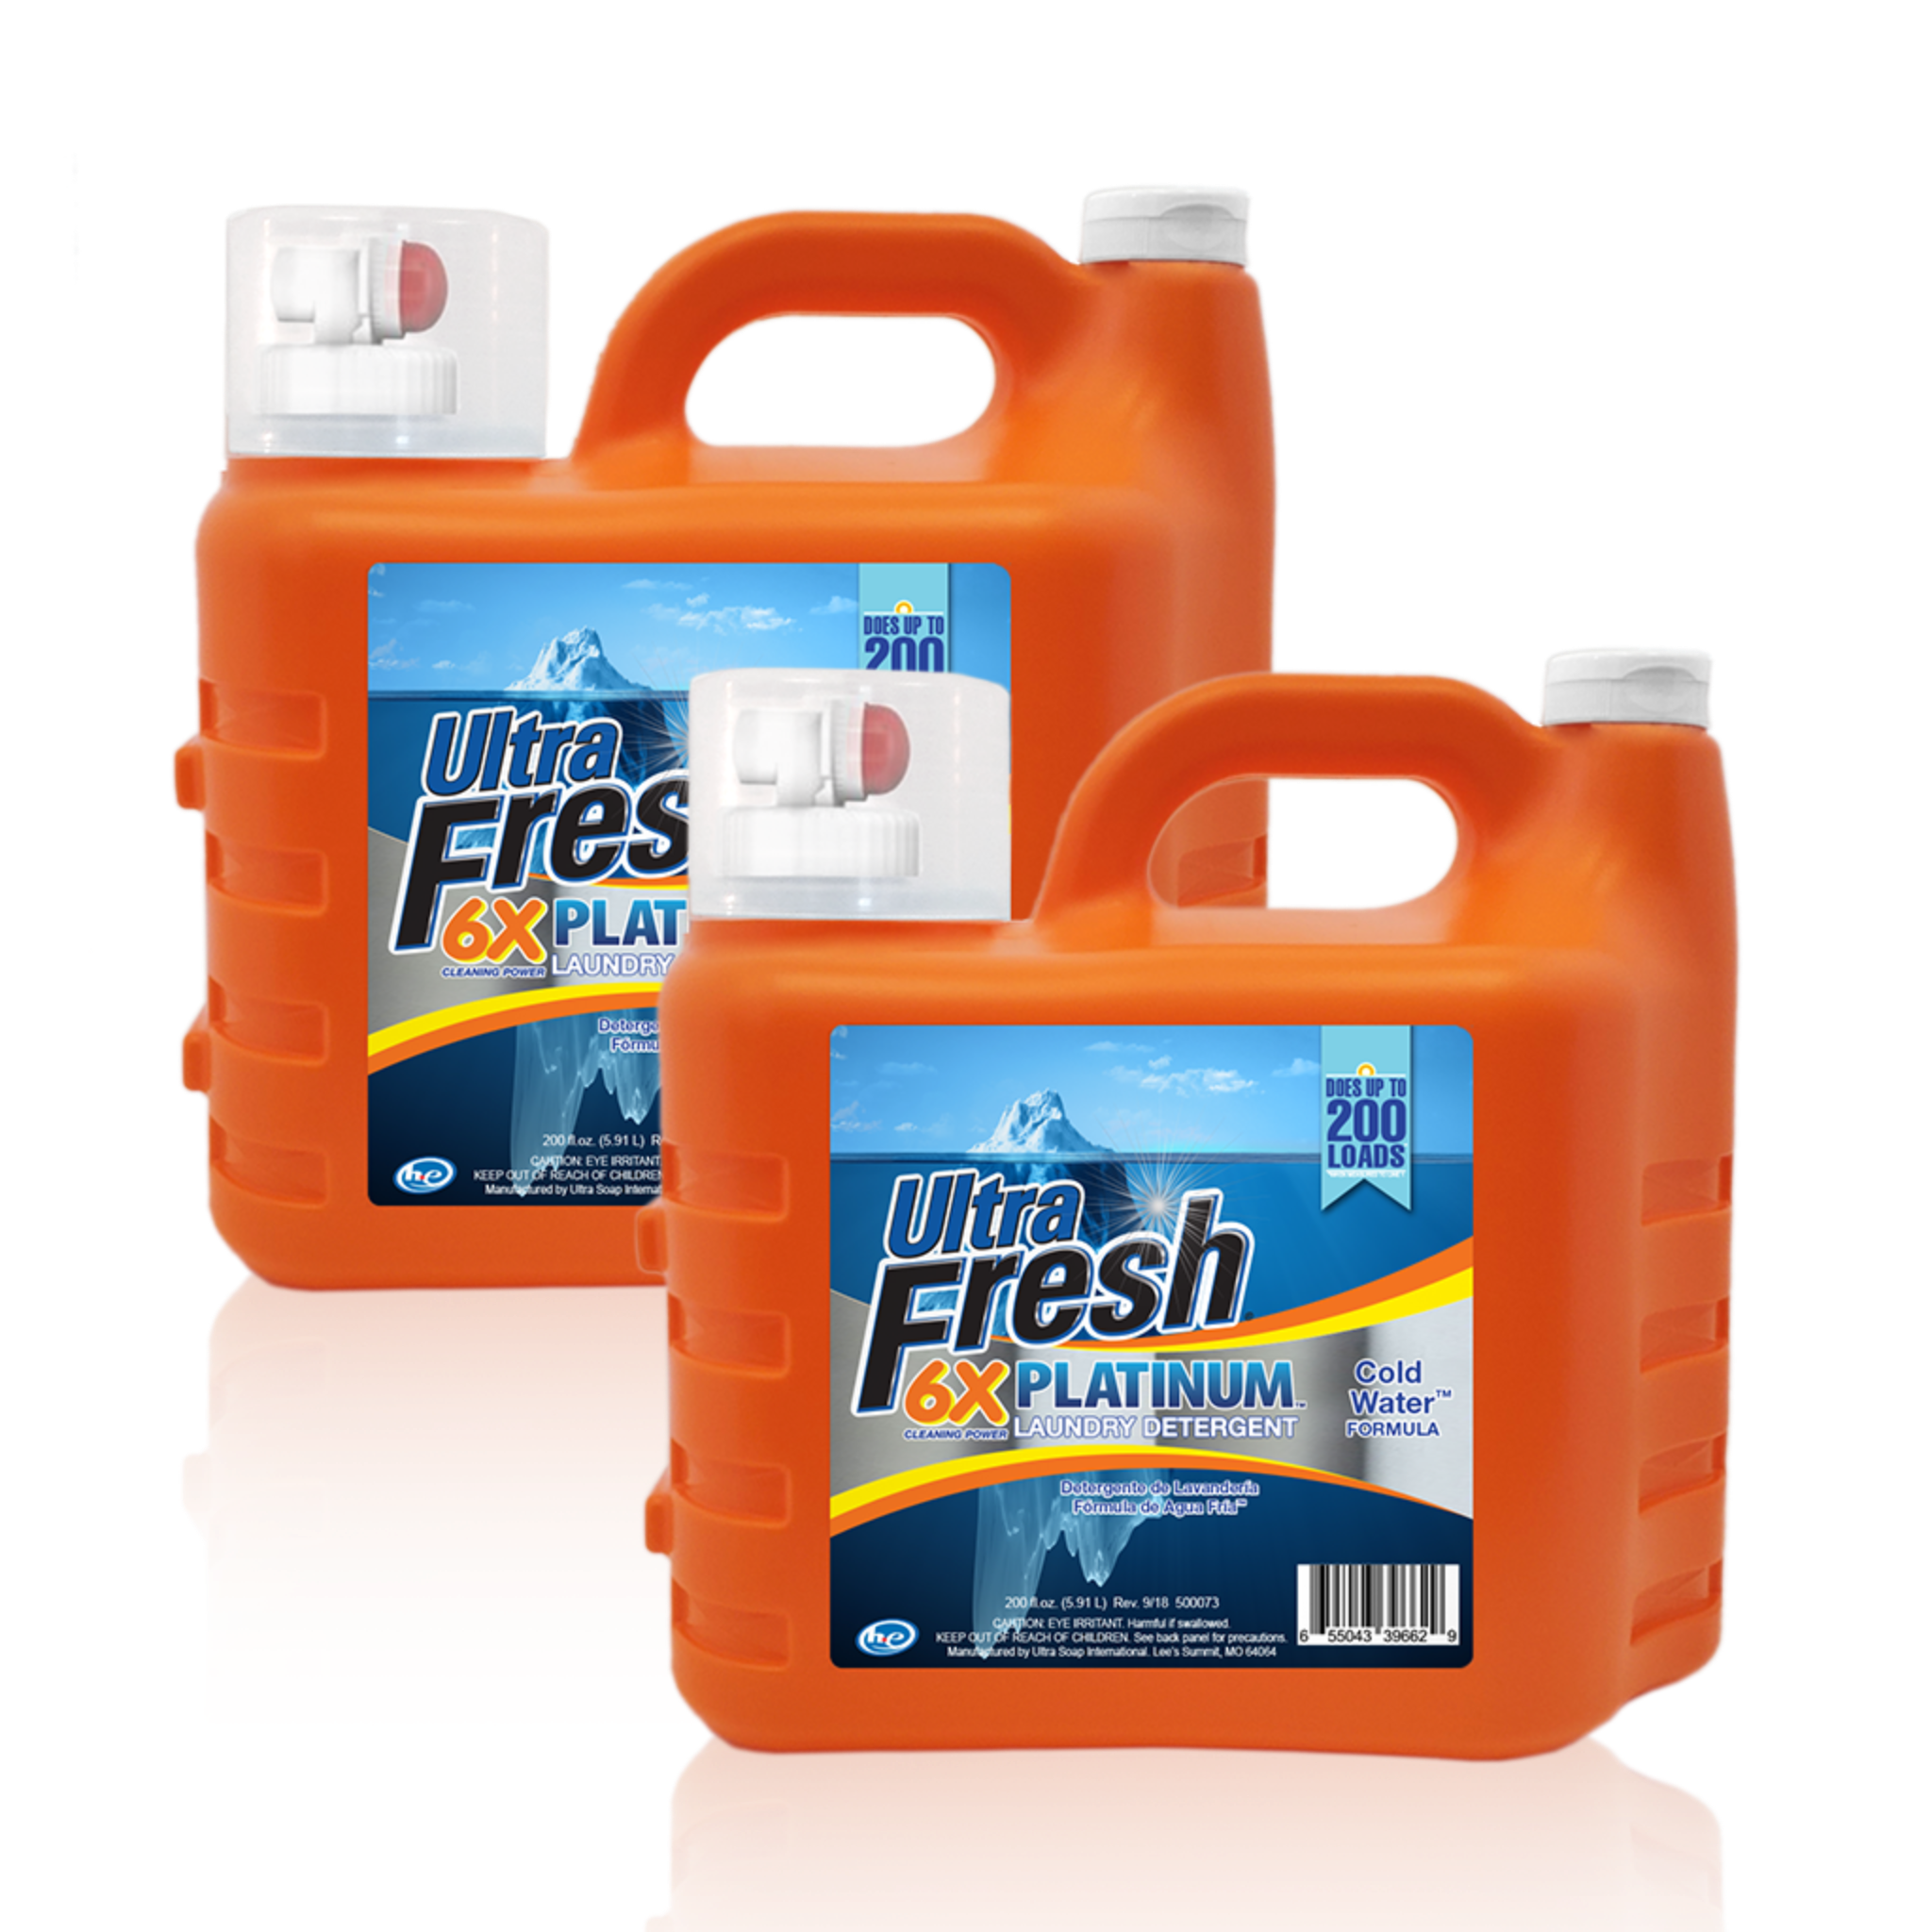 Ultra Fresh Platinum Cold Water Formula 6X Laundry Detergent - 2x200 Ounce Club Pack